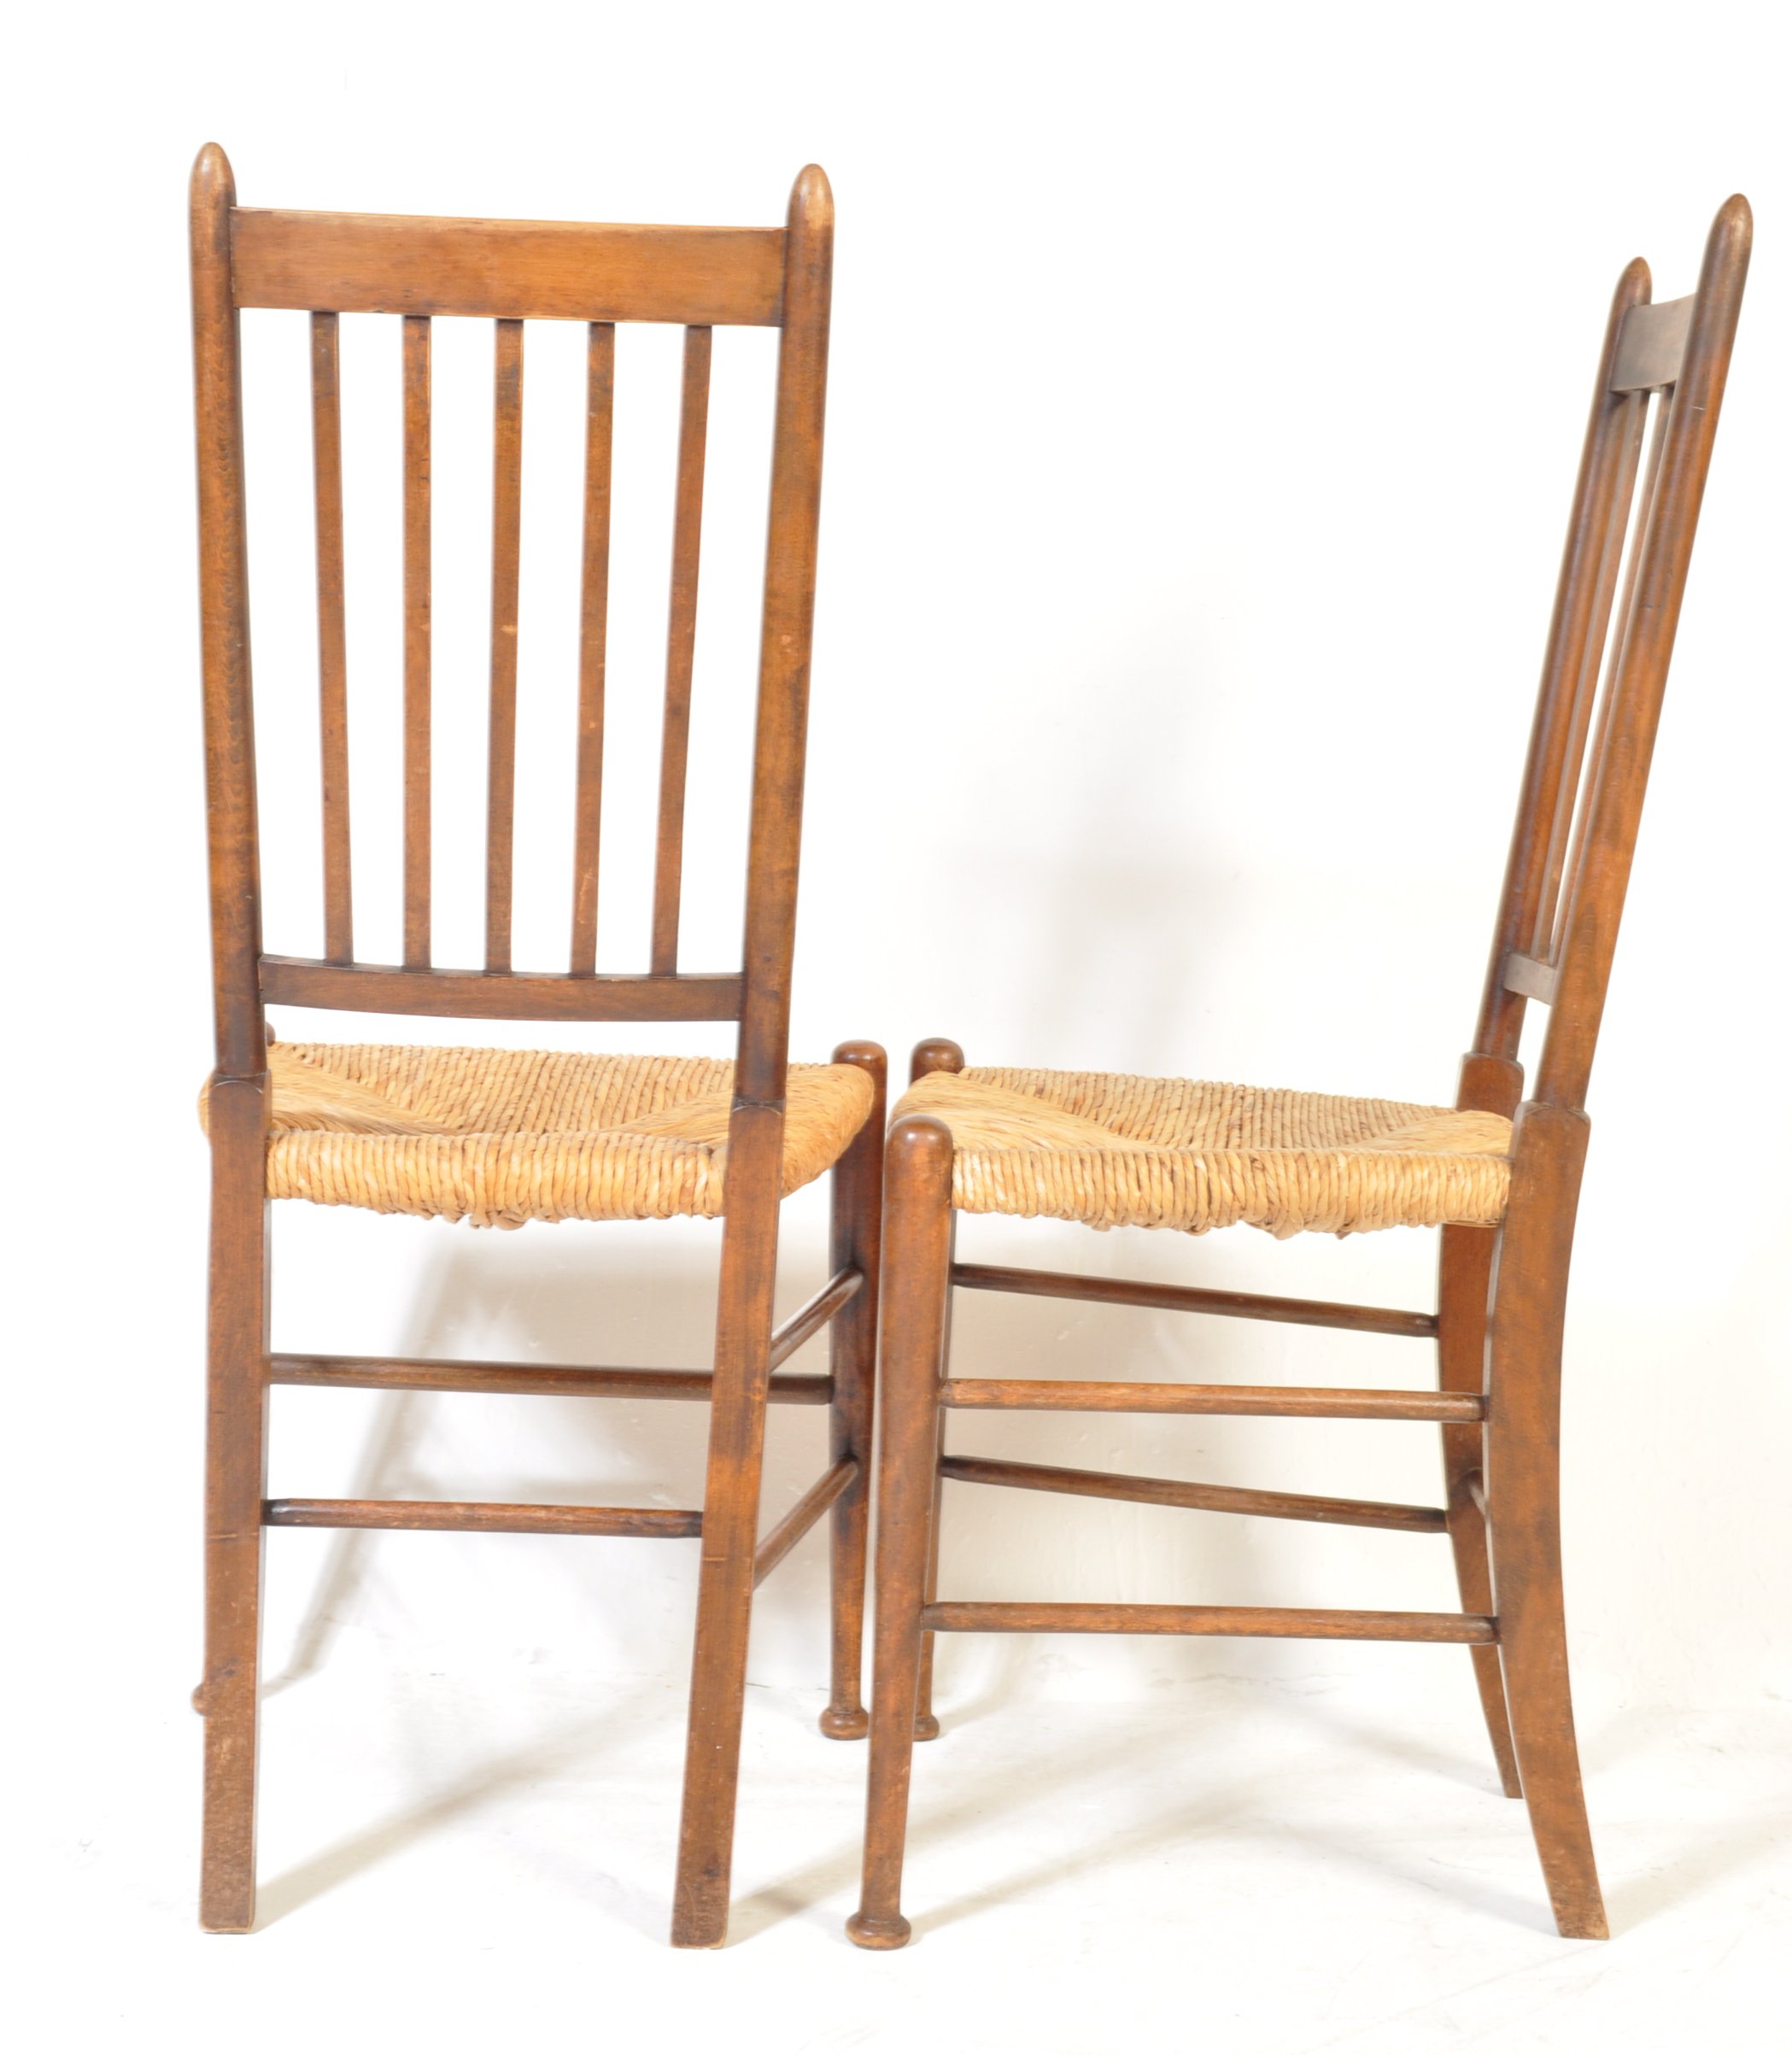 FOUR VINTAGE MID 20TH CENTURY COUNTRY FARM HOUSE CHAIRS - Image 7 of 7